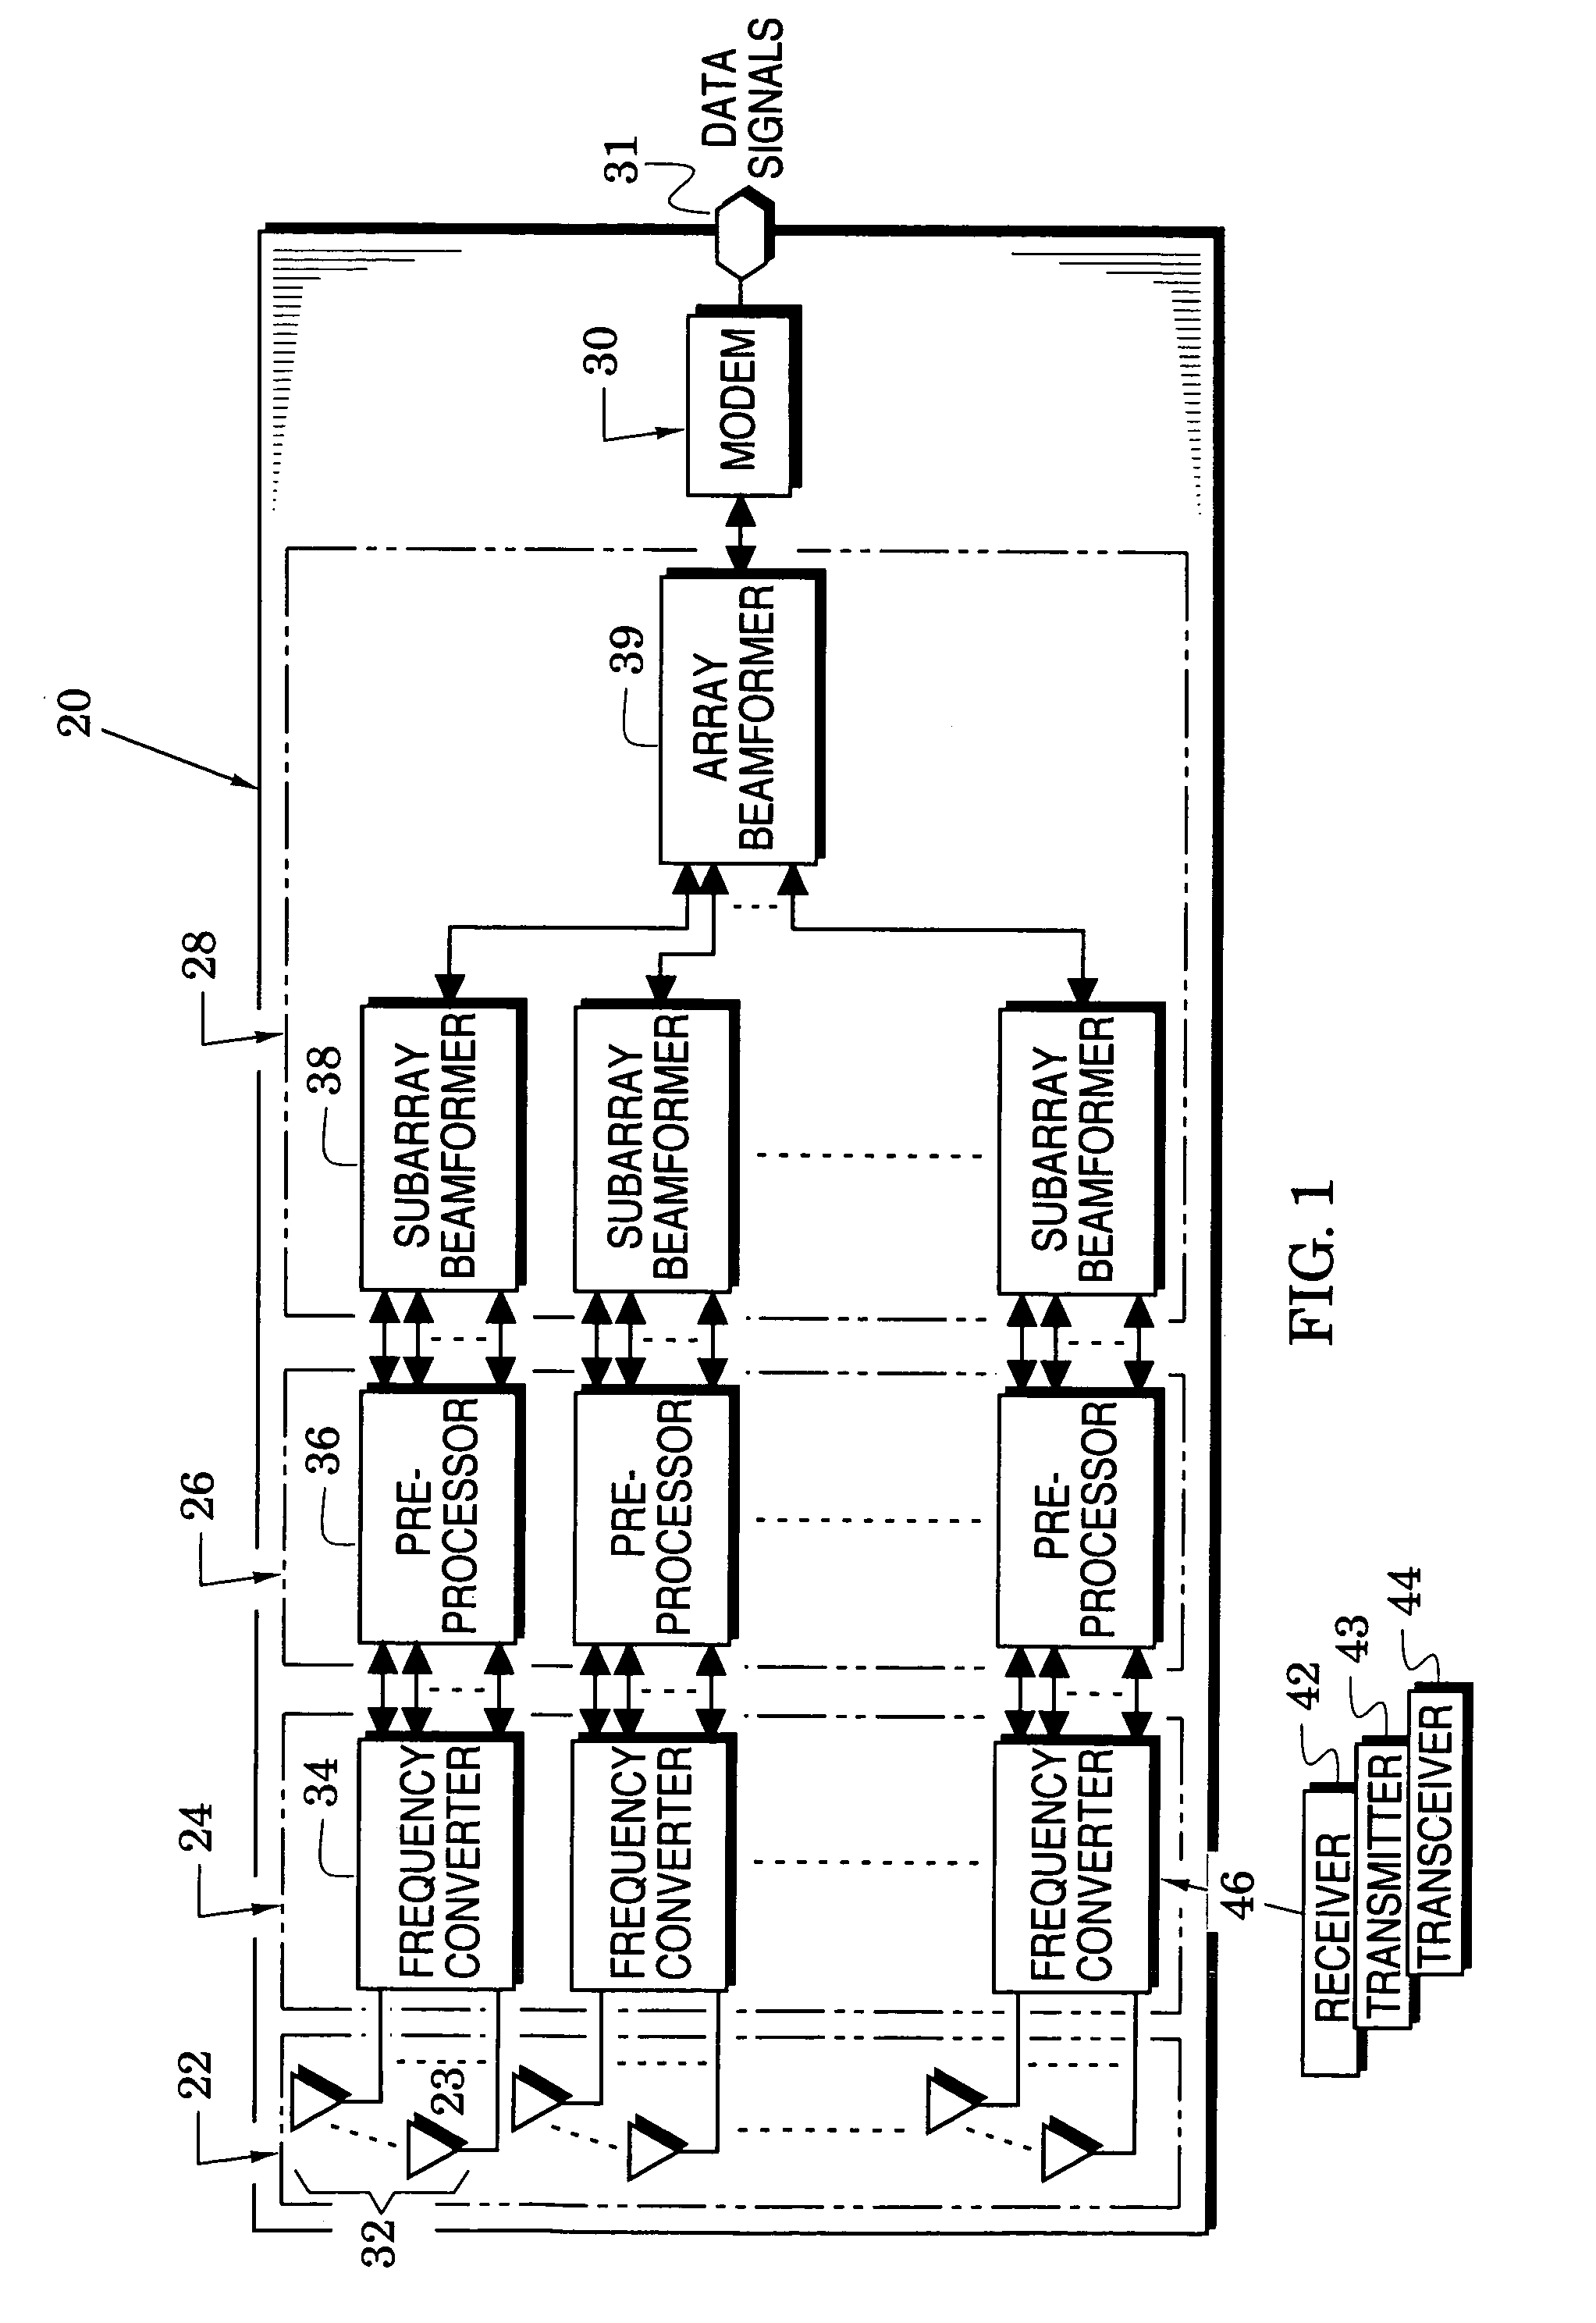 Adaptive beamforming methods and systems that enhance performance and reduce computations